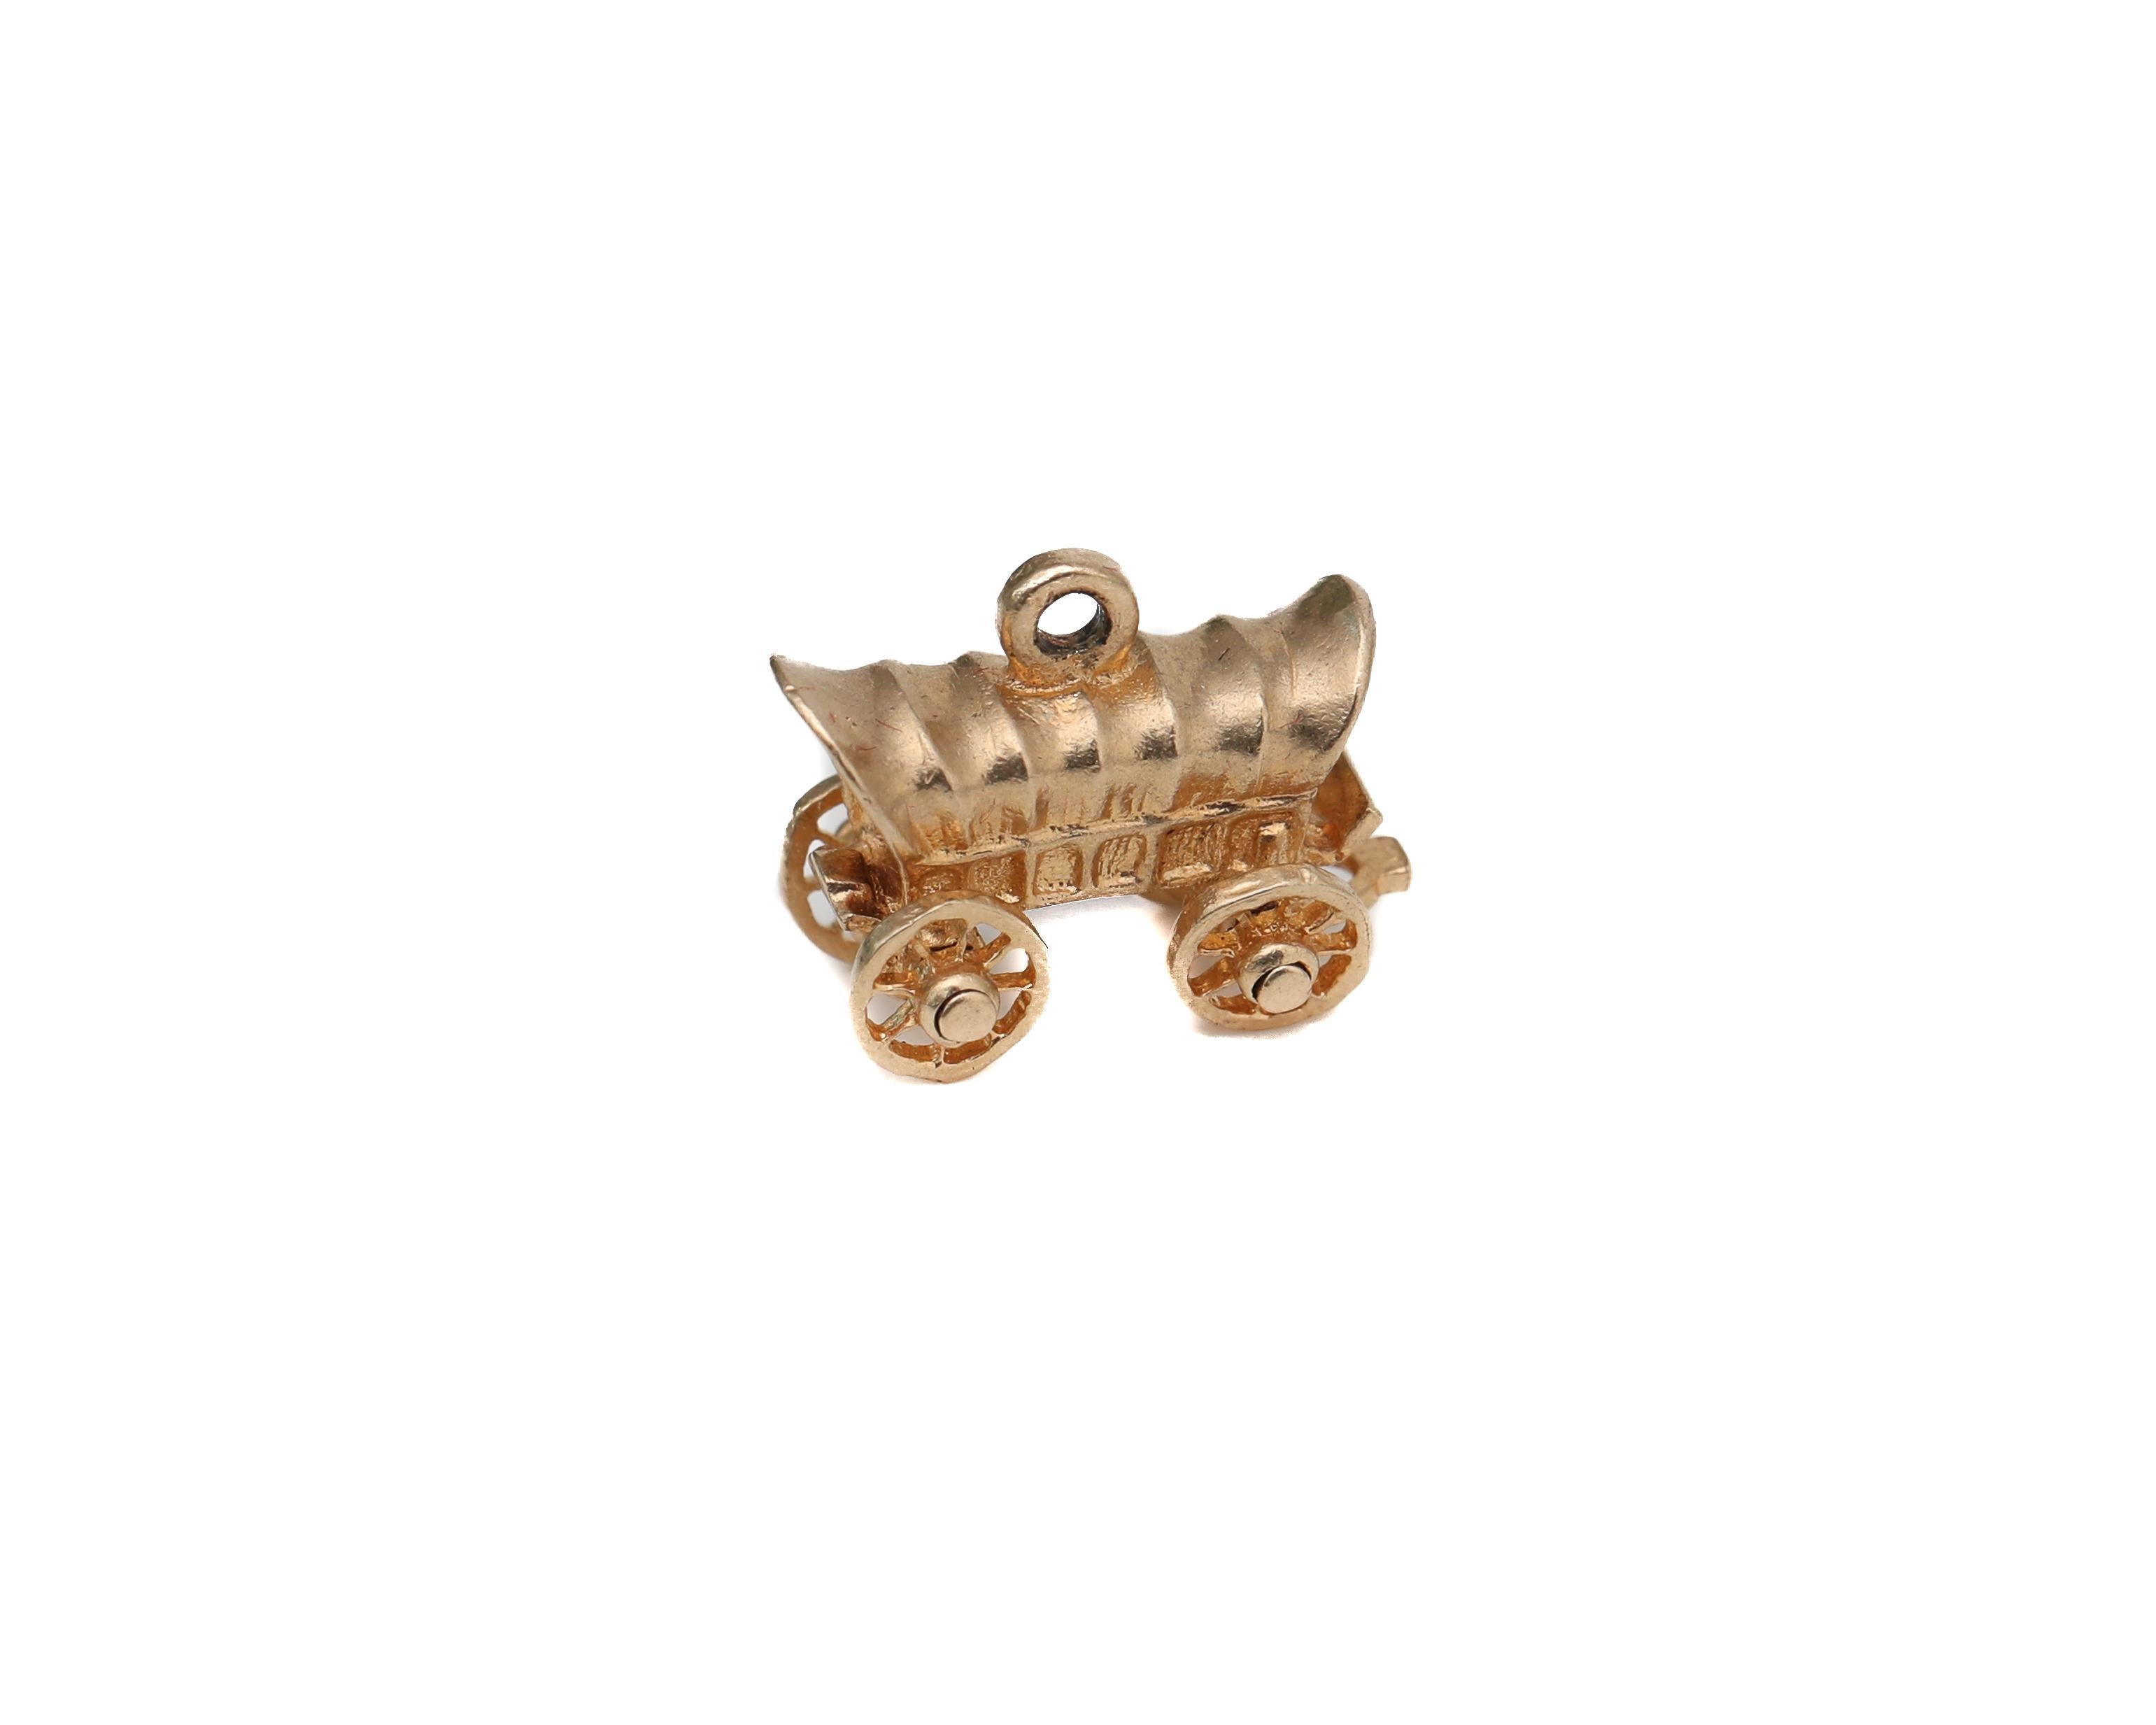 Charm details:
Gold: 14 karat yellow gold
Weight: 1.82 grams
Measurement:

1950s Oregon Trail Car Wagon crafted in 14 karat yellow gold. Great detailing and intricacy in showing the wagon. 